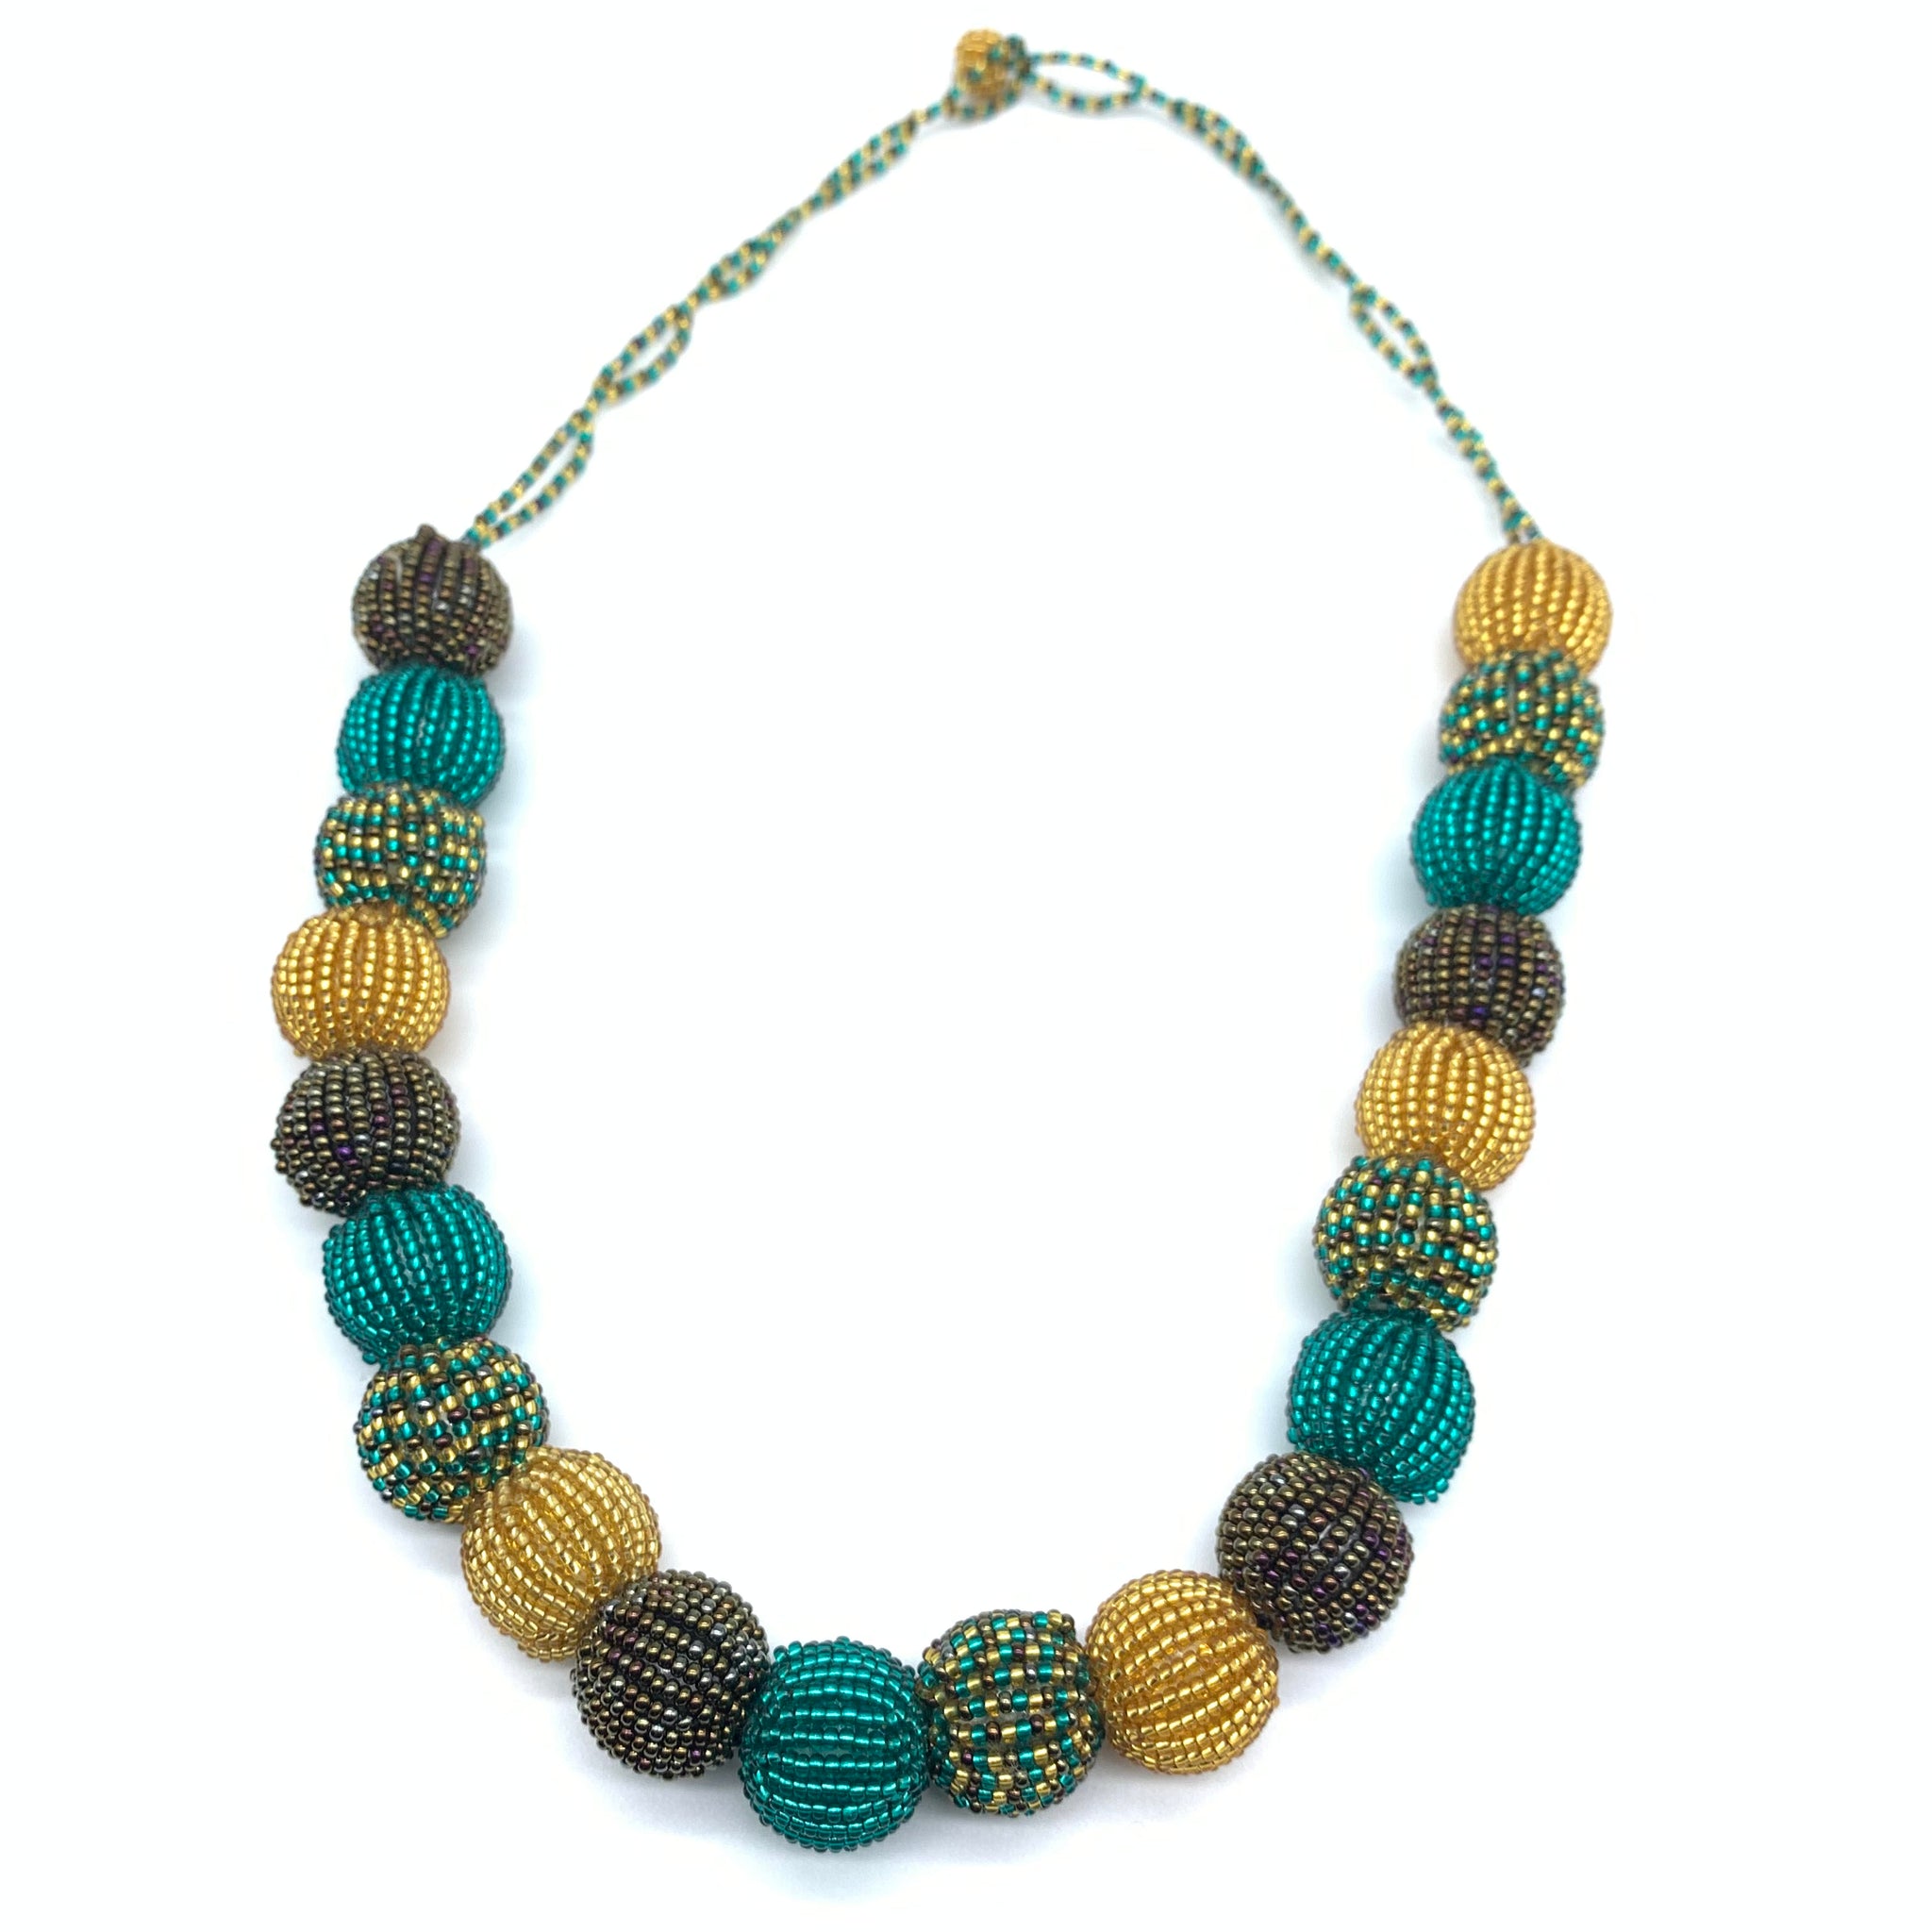 Beaded Necklace- Green Variation